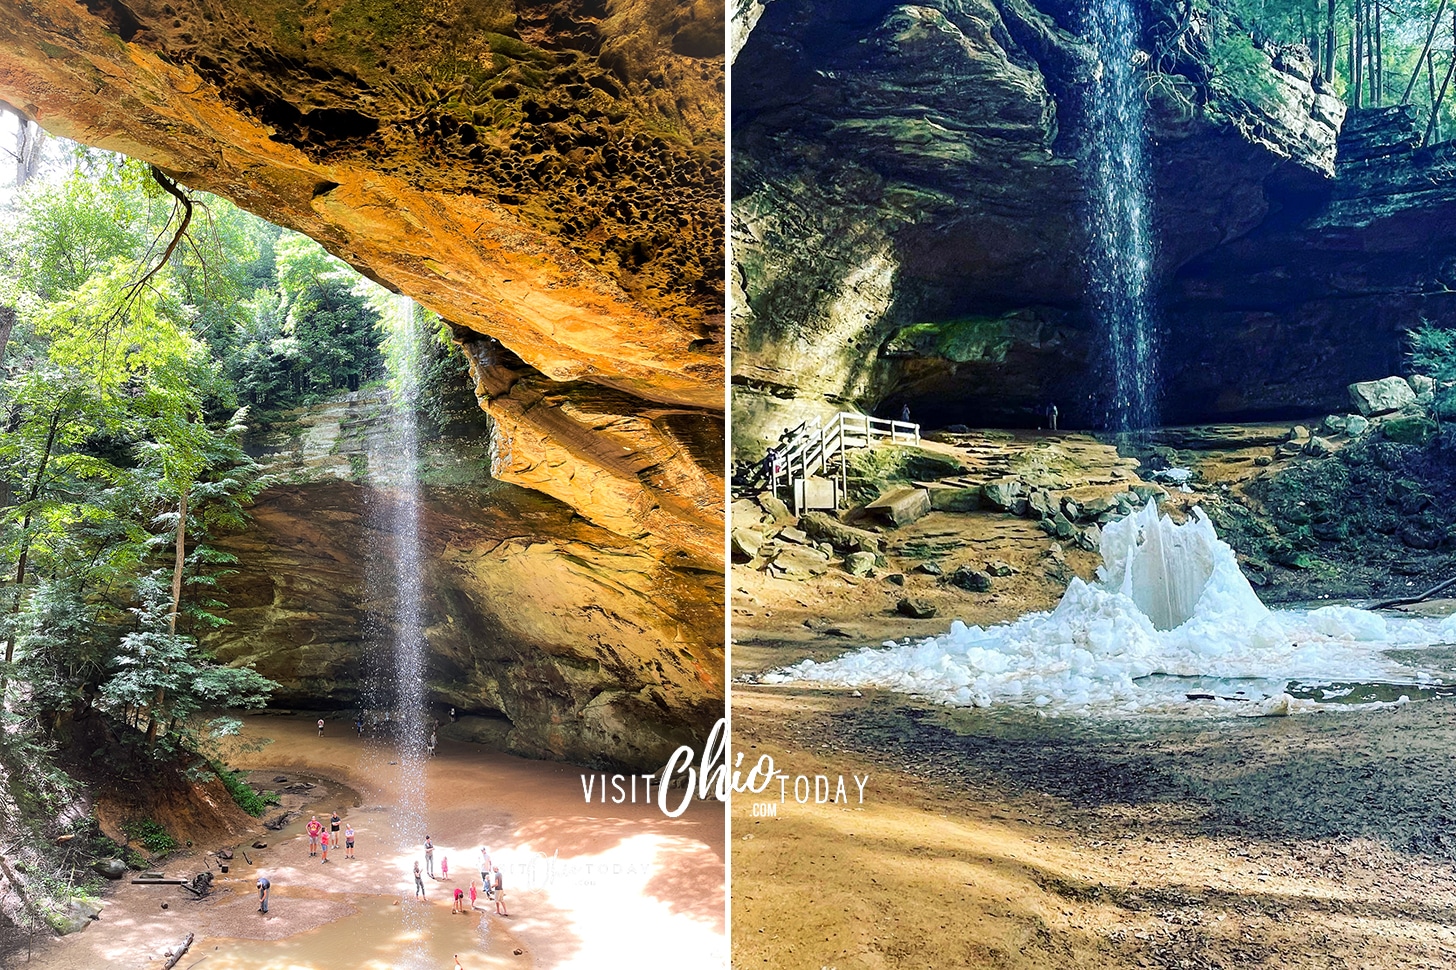 horizontal image with a photo of Ash Cave Hocking Hills in the summer beside a photo of Ash Cave waterfall frozen over in the winter. Photo credits: Cindy Gordon of VisitOhioToday.com